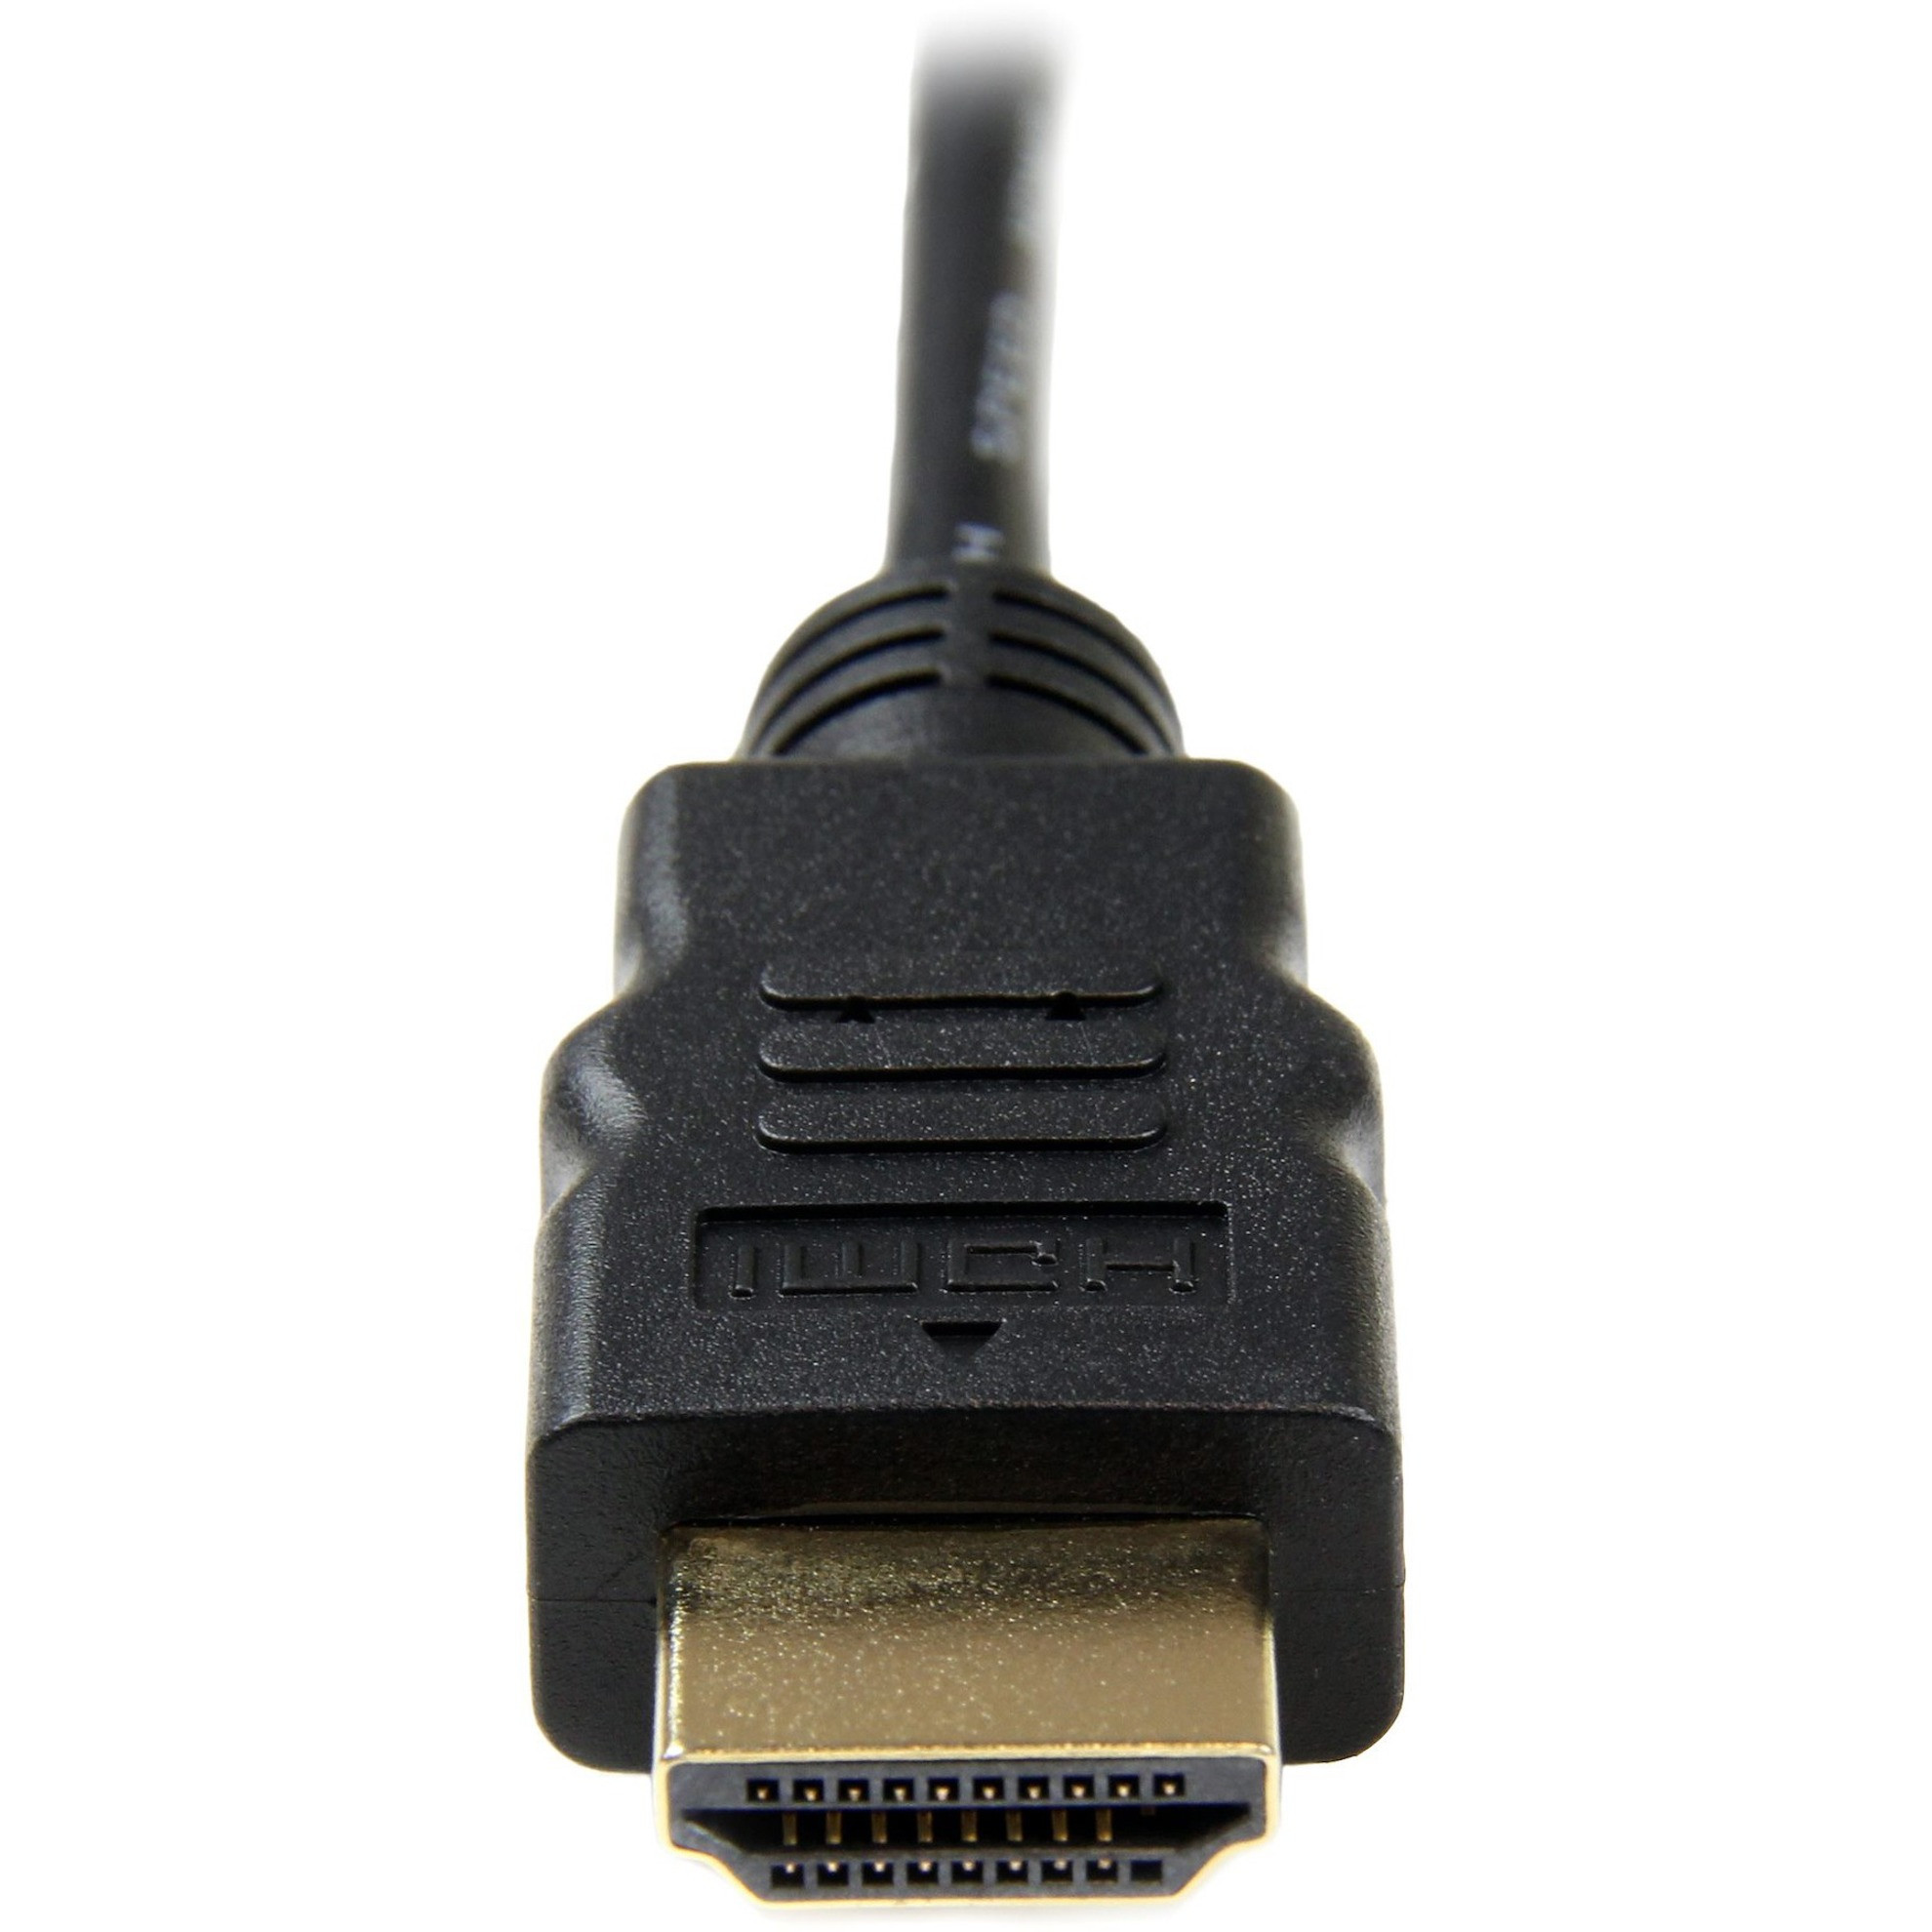 3ft Mini HDMI to HDMI Cable Adapter 4K - HDMI® Cables & HDMI Adapters